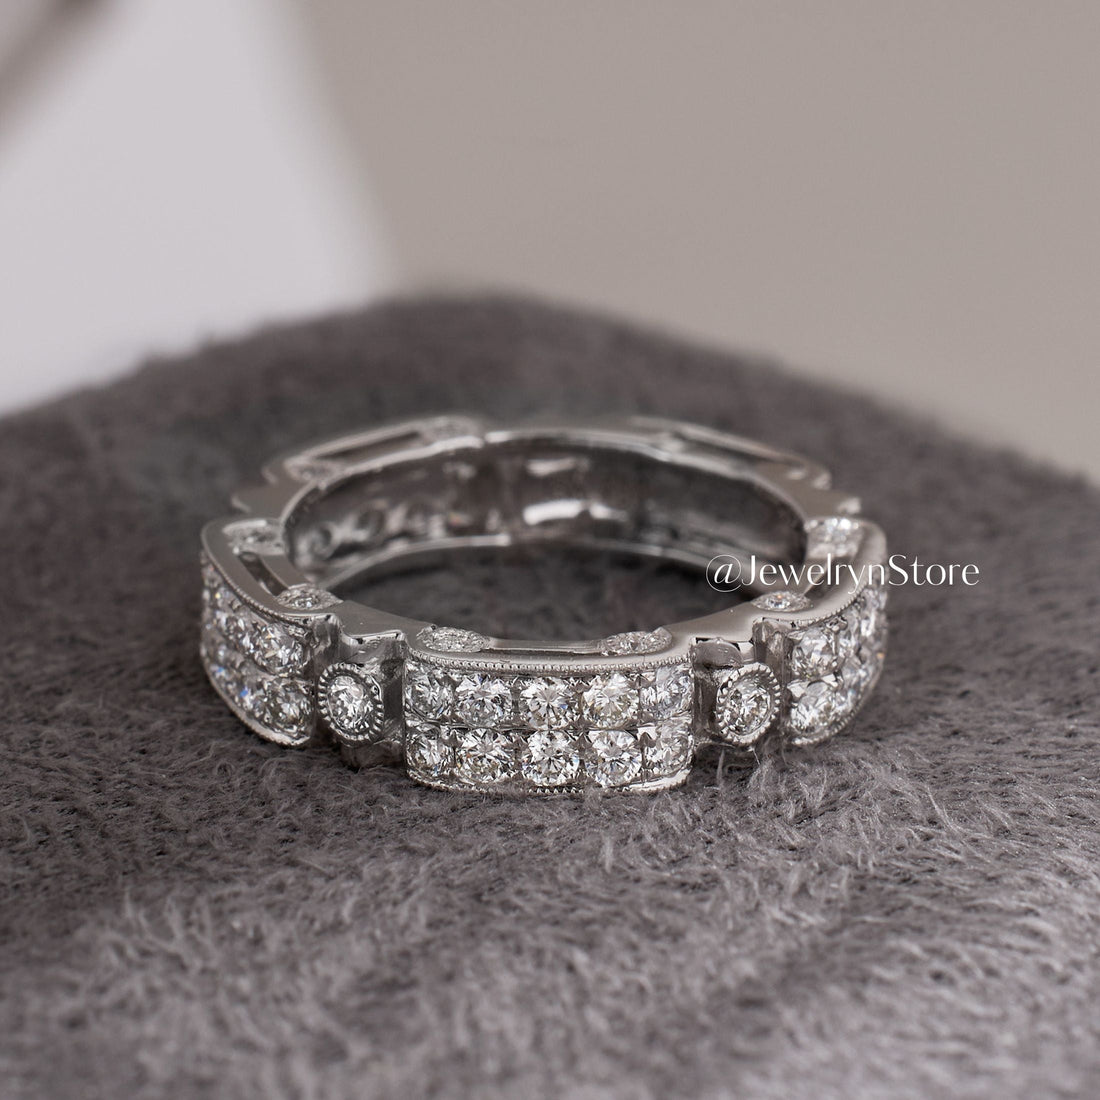 Vintage-Styled Diamond Stackable Band